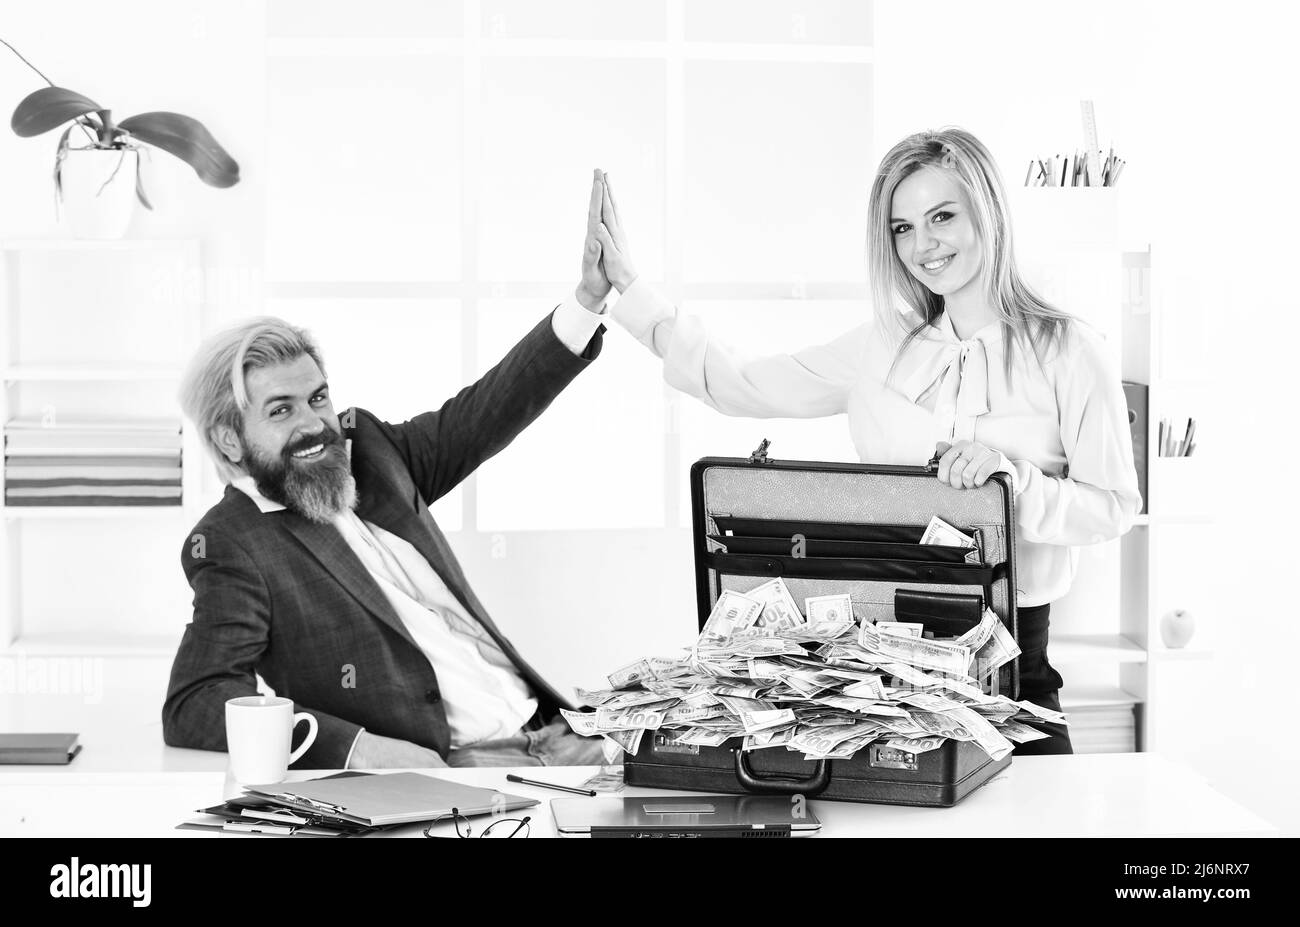 Financial success. Tax service. Financial expert. Taxation. Illegal profit. Man with briefcase full of cash. Financial achievement. Money laundering Stock Photo